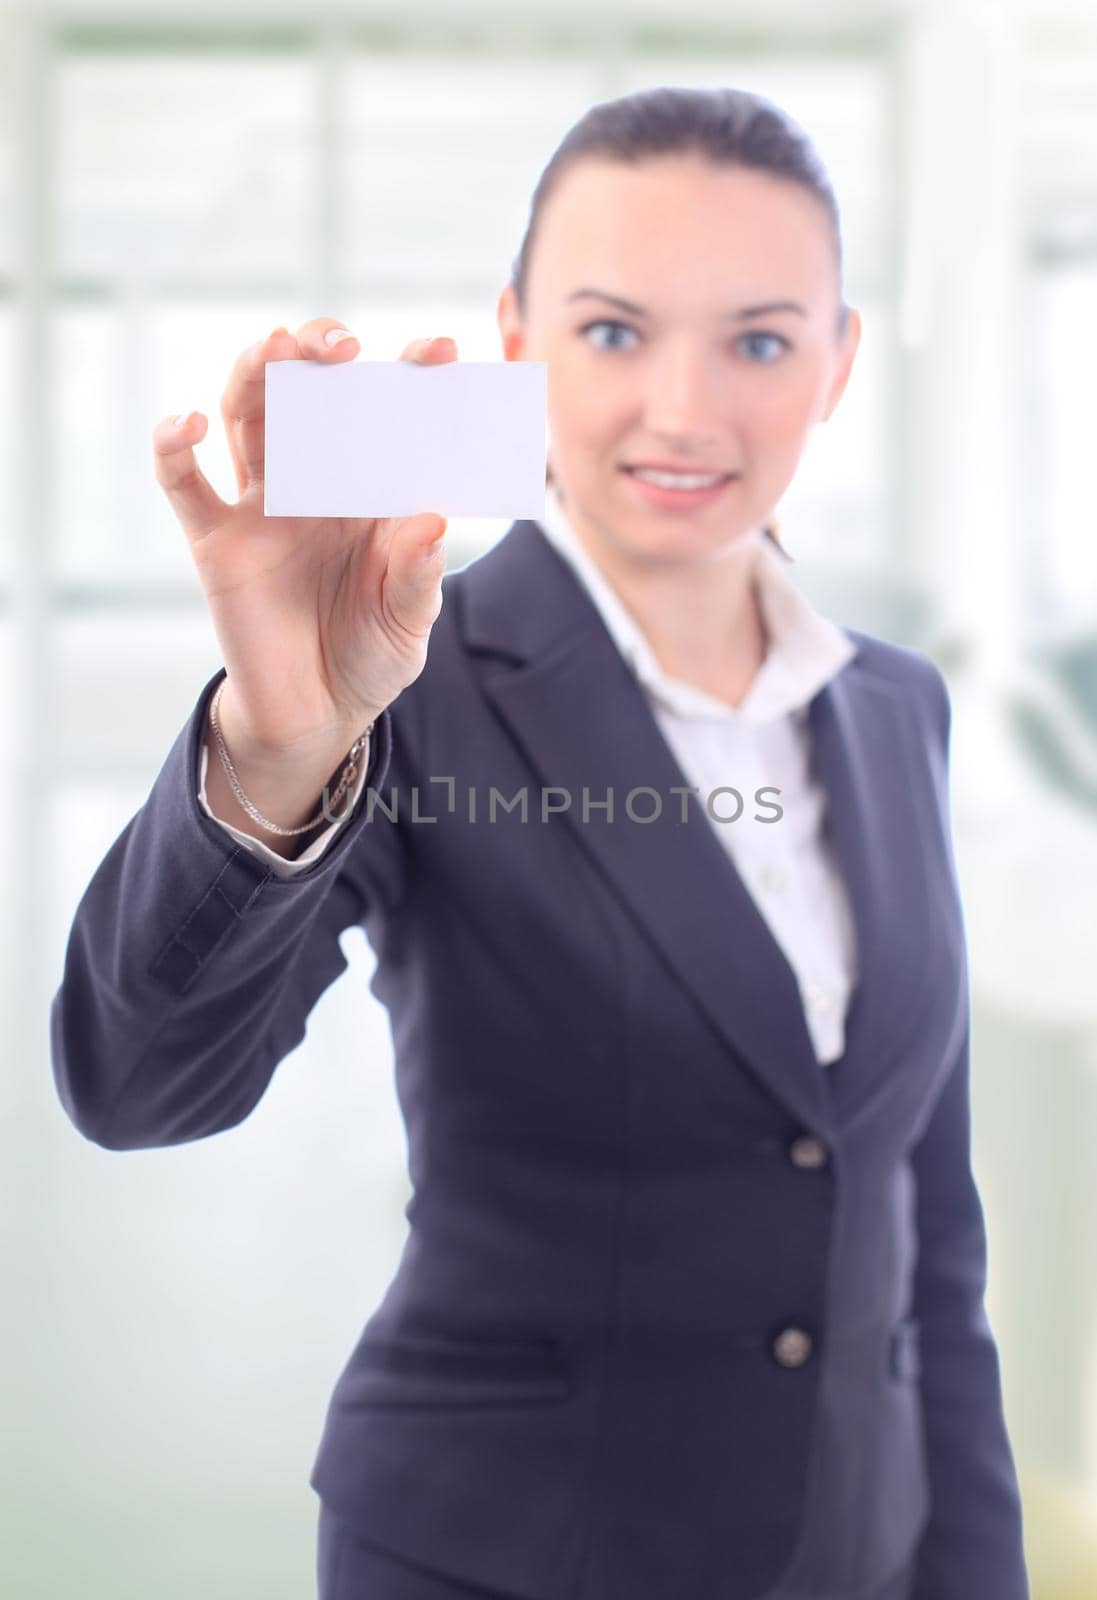 Beautiful businesswoman with the business card in the office